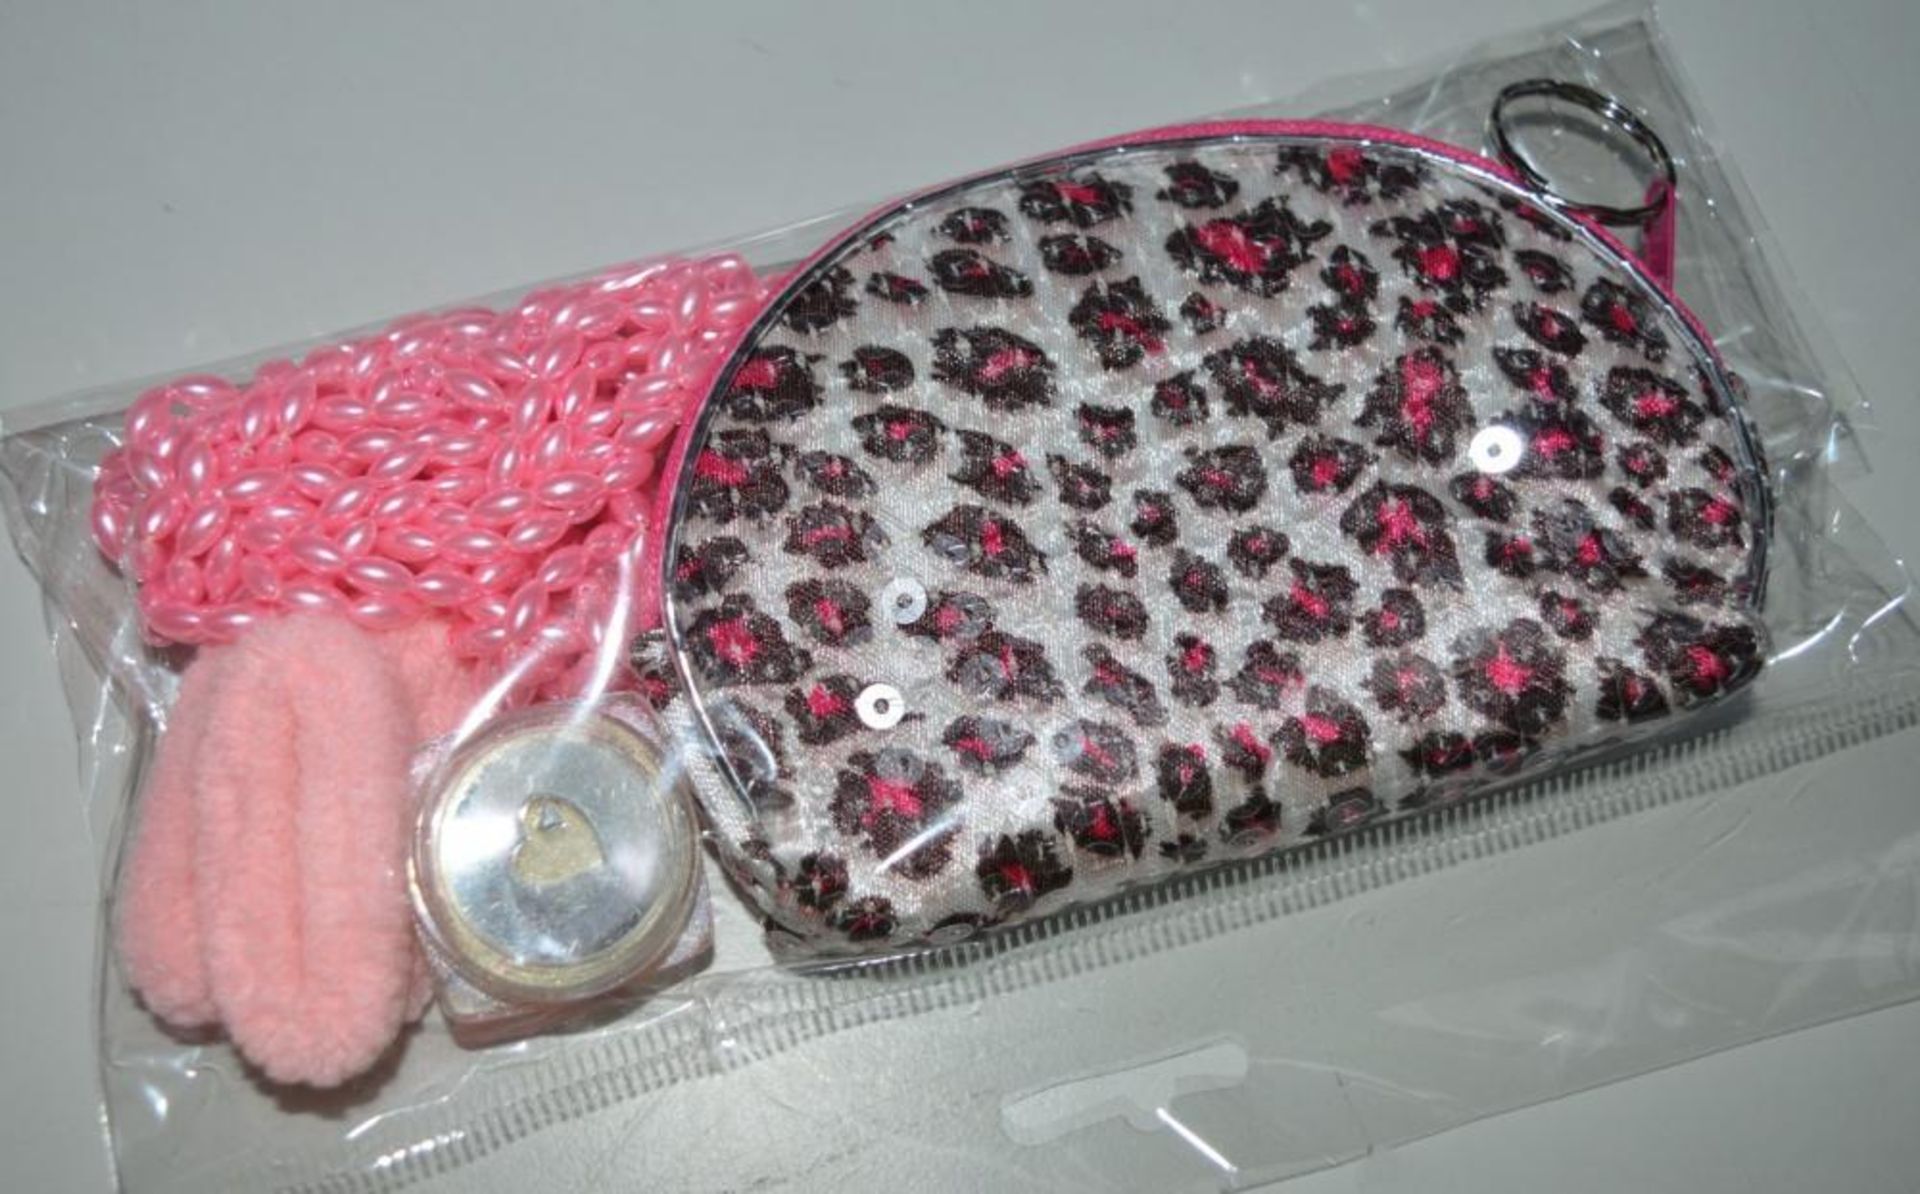 50 x Girls Beauty Gift Sets - Each Set Includes Items Such as a Stylish Purse, Ear Rings, Hair Bobbl - Image 3 of 14